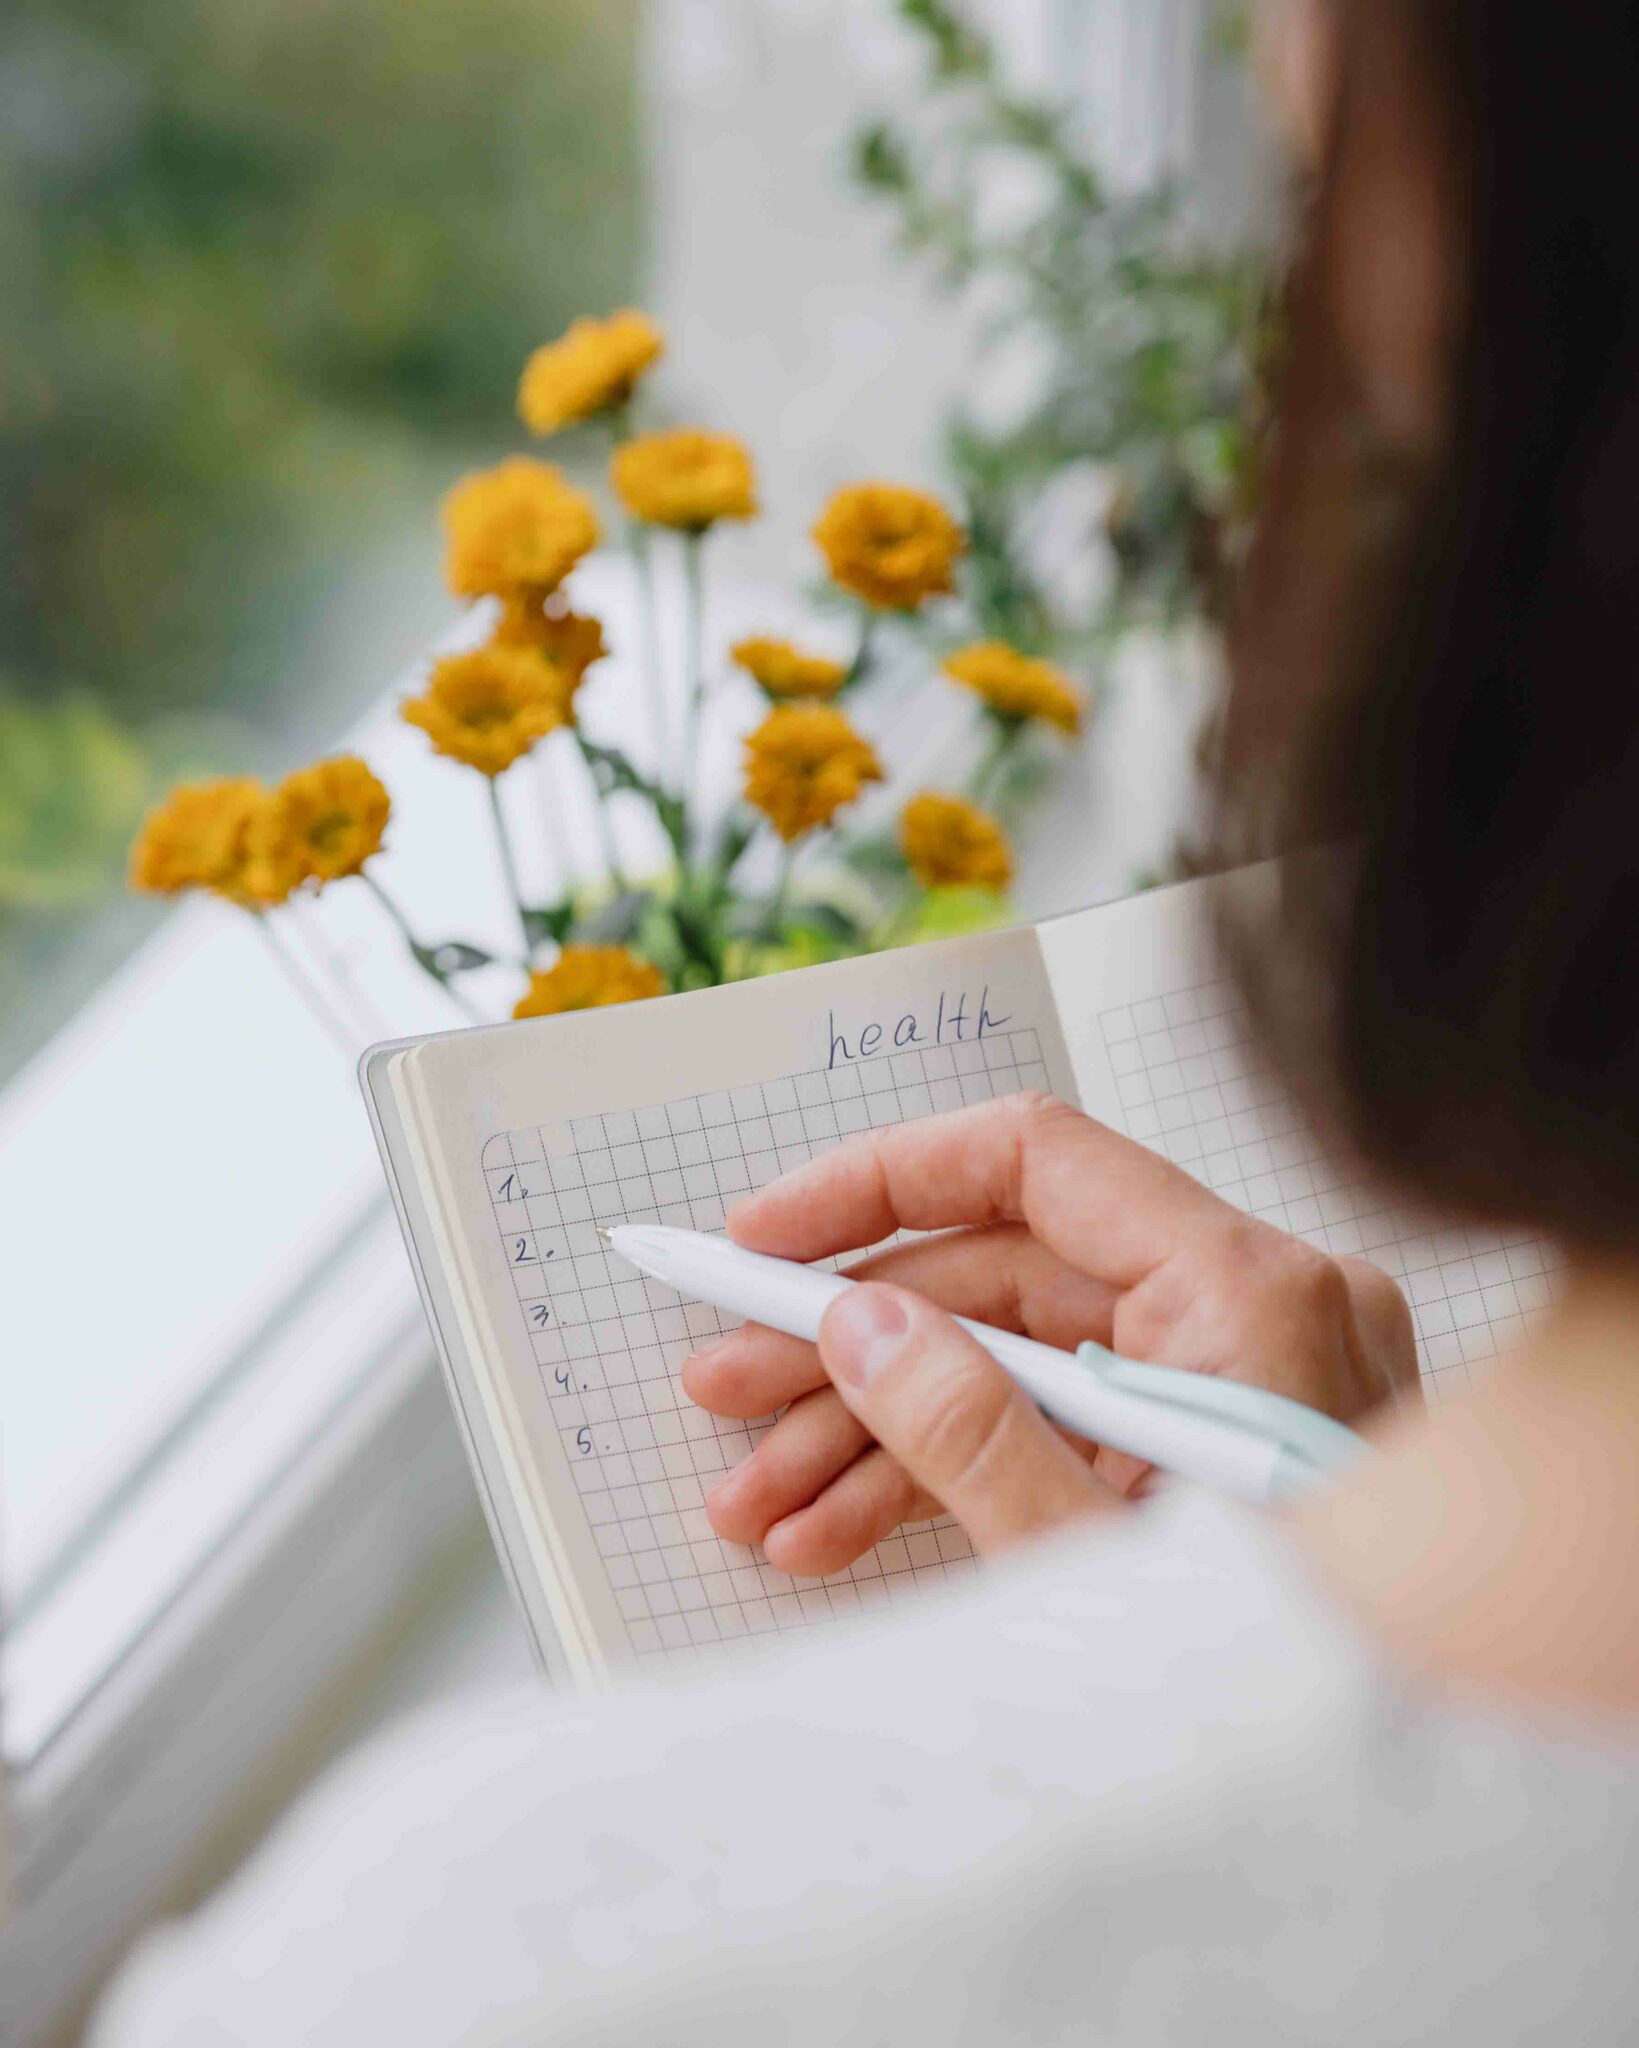 Woman journaling about her health